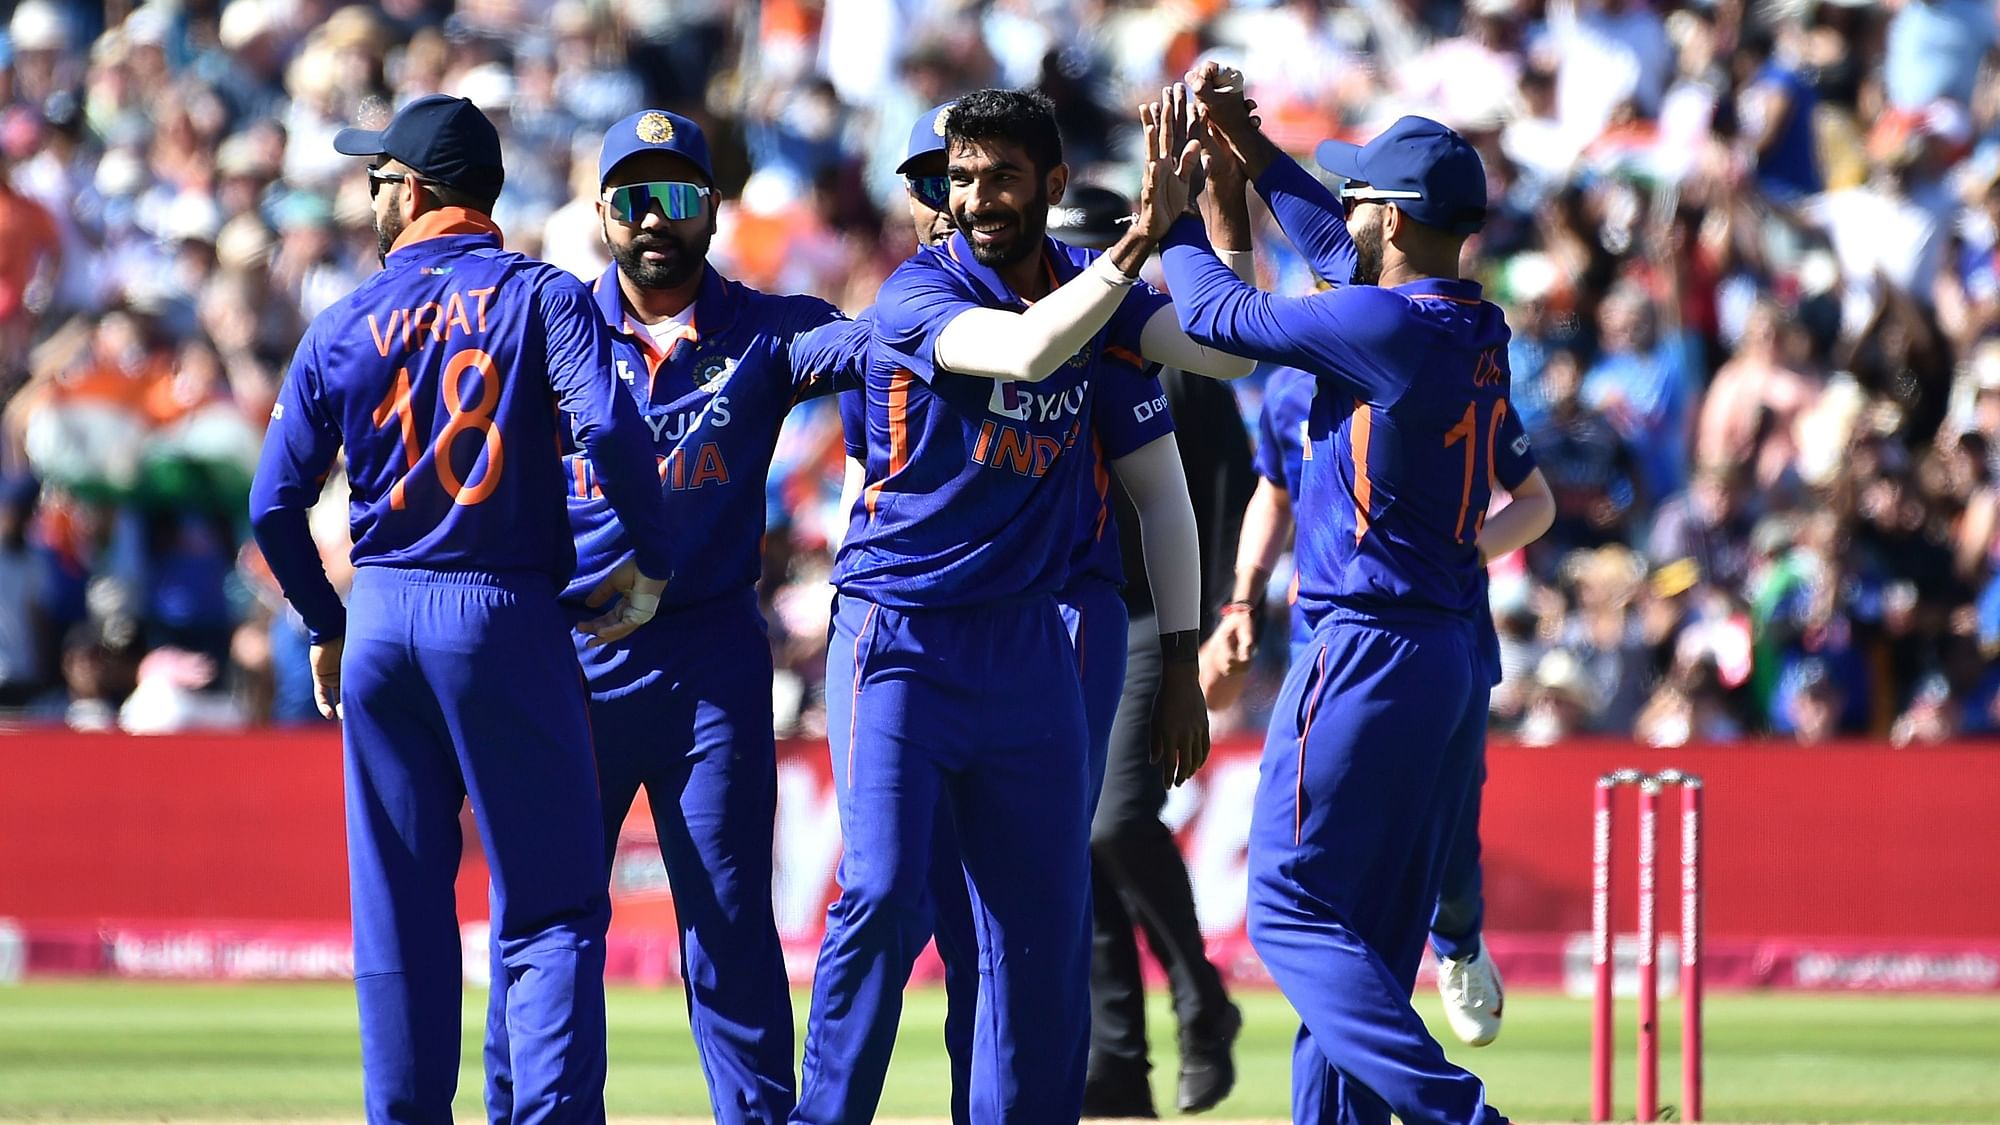 <div class="paragraphs"><p>Indian players celebrate after taking a wicket against England in the second T20I at Edgbaston on Saturday.&nbsp;</p></div>